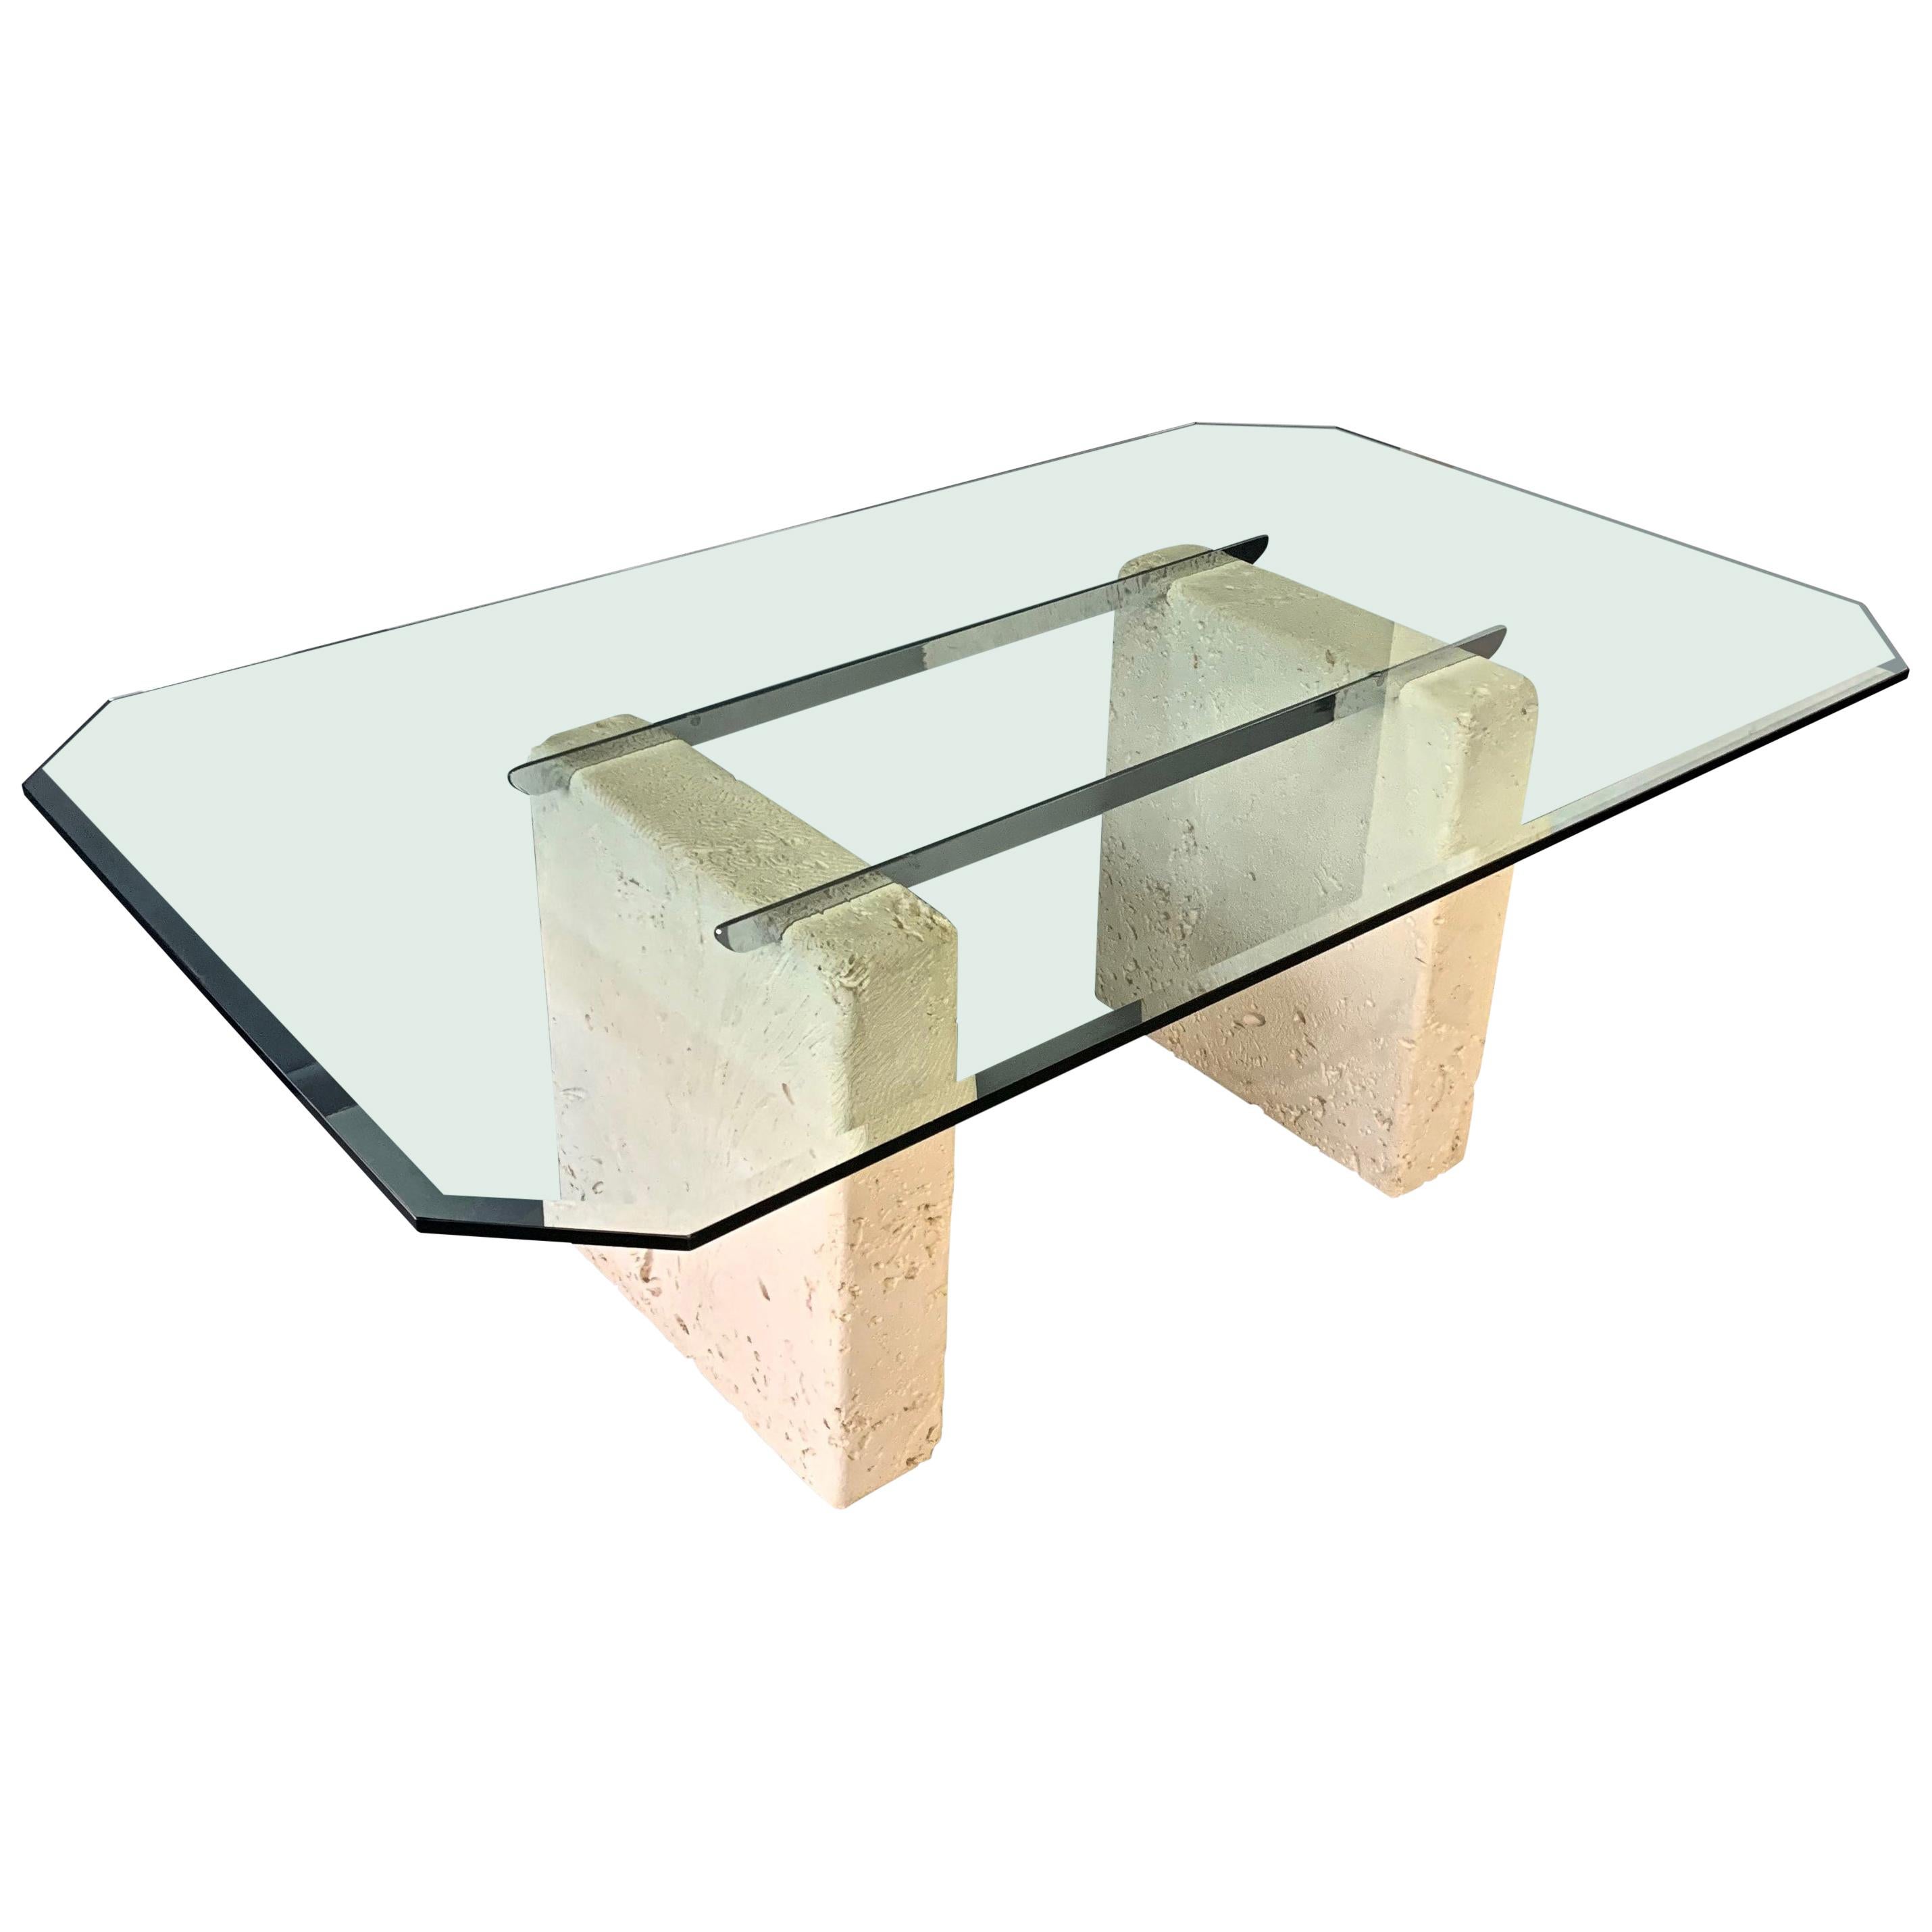 Ceramic, Glass, and Chrome Dining Table with a Coral Motif Postmodern